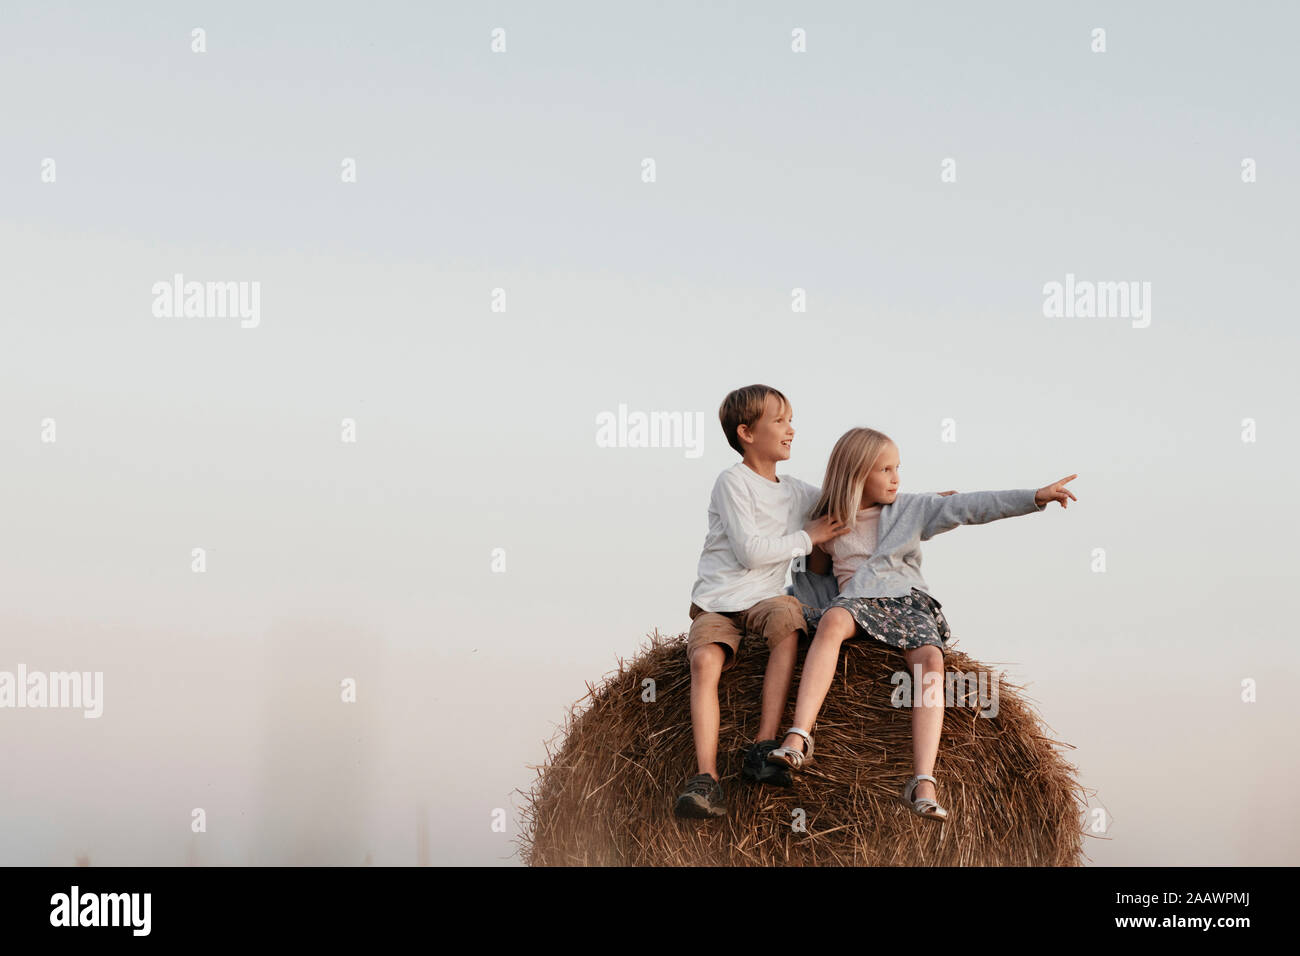 Two kids sitting on the haystack Stock Photo